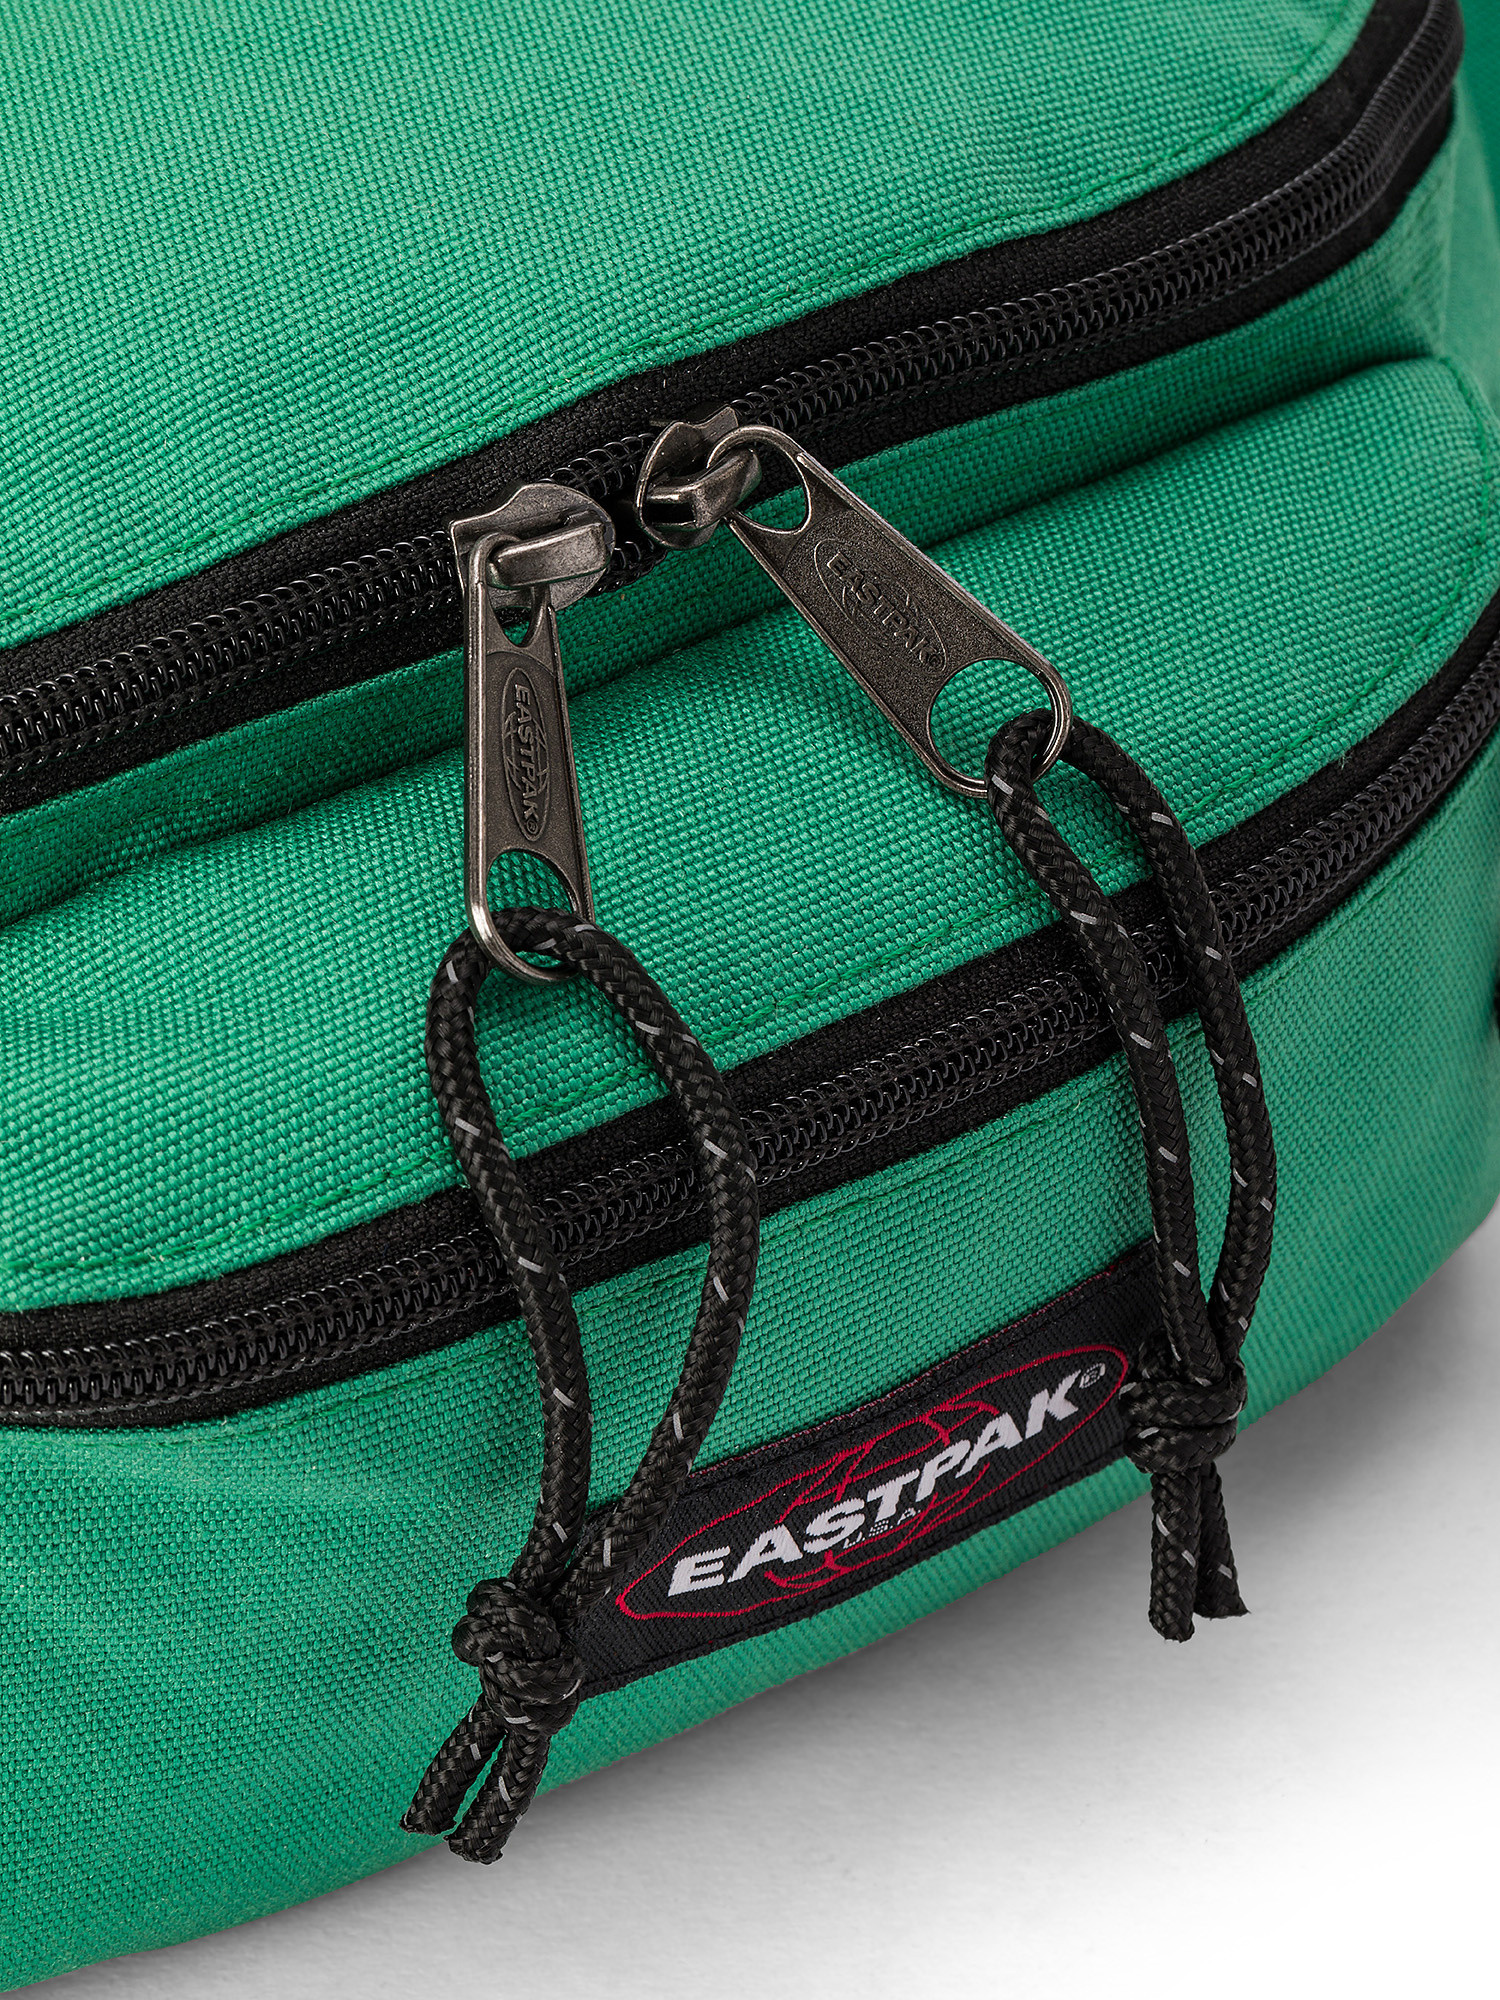 Eastpak - Pouch Doggy Bag Grass Green, Green, large image number 2